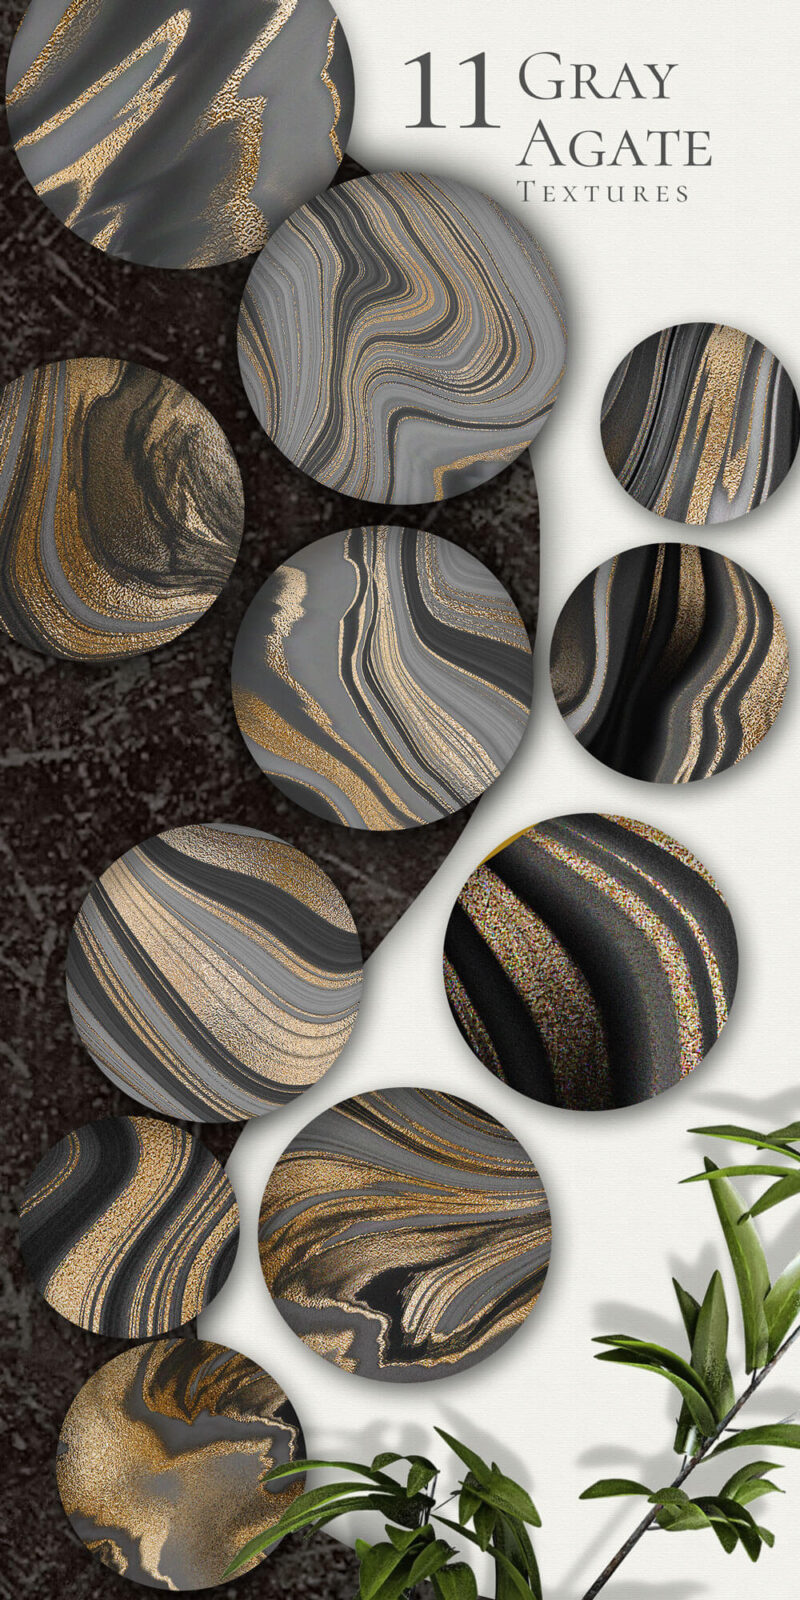 Agate textures gray